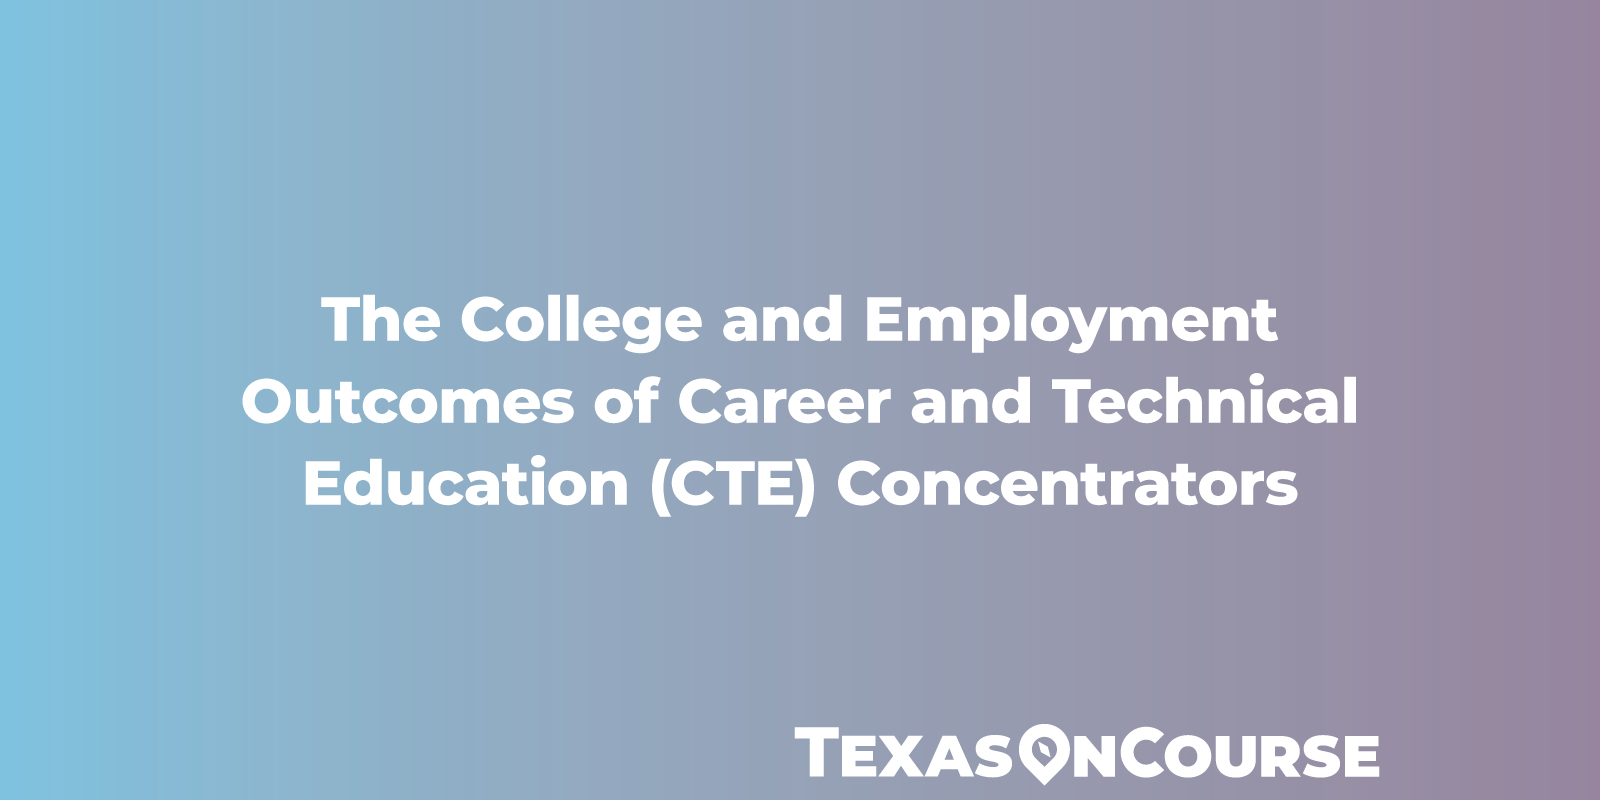 The College and Employment Outcomes of Career and Technical Education (CTE) Concentrators